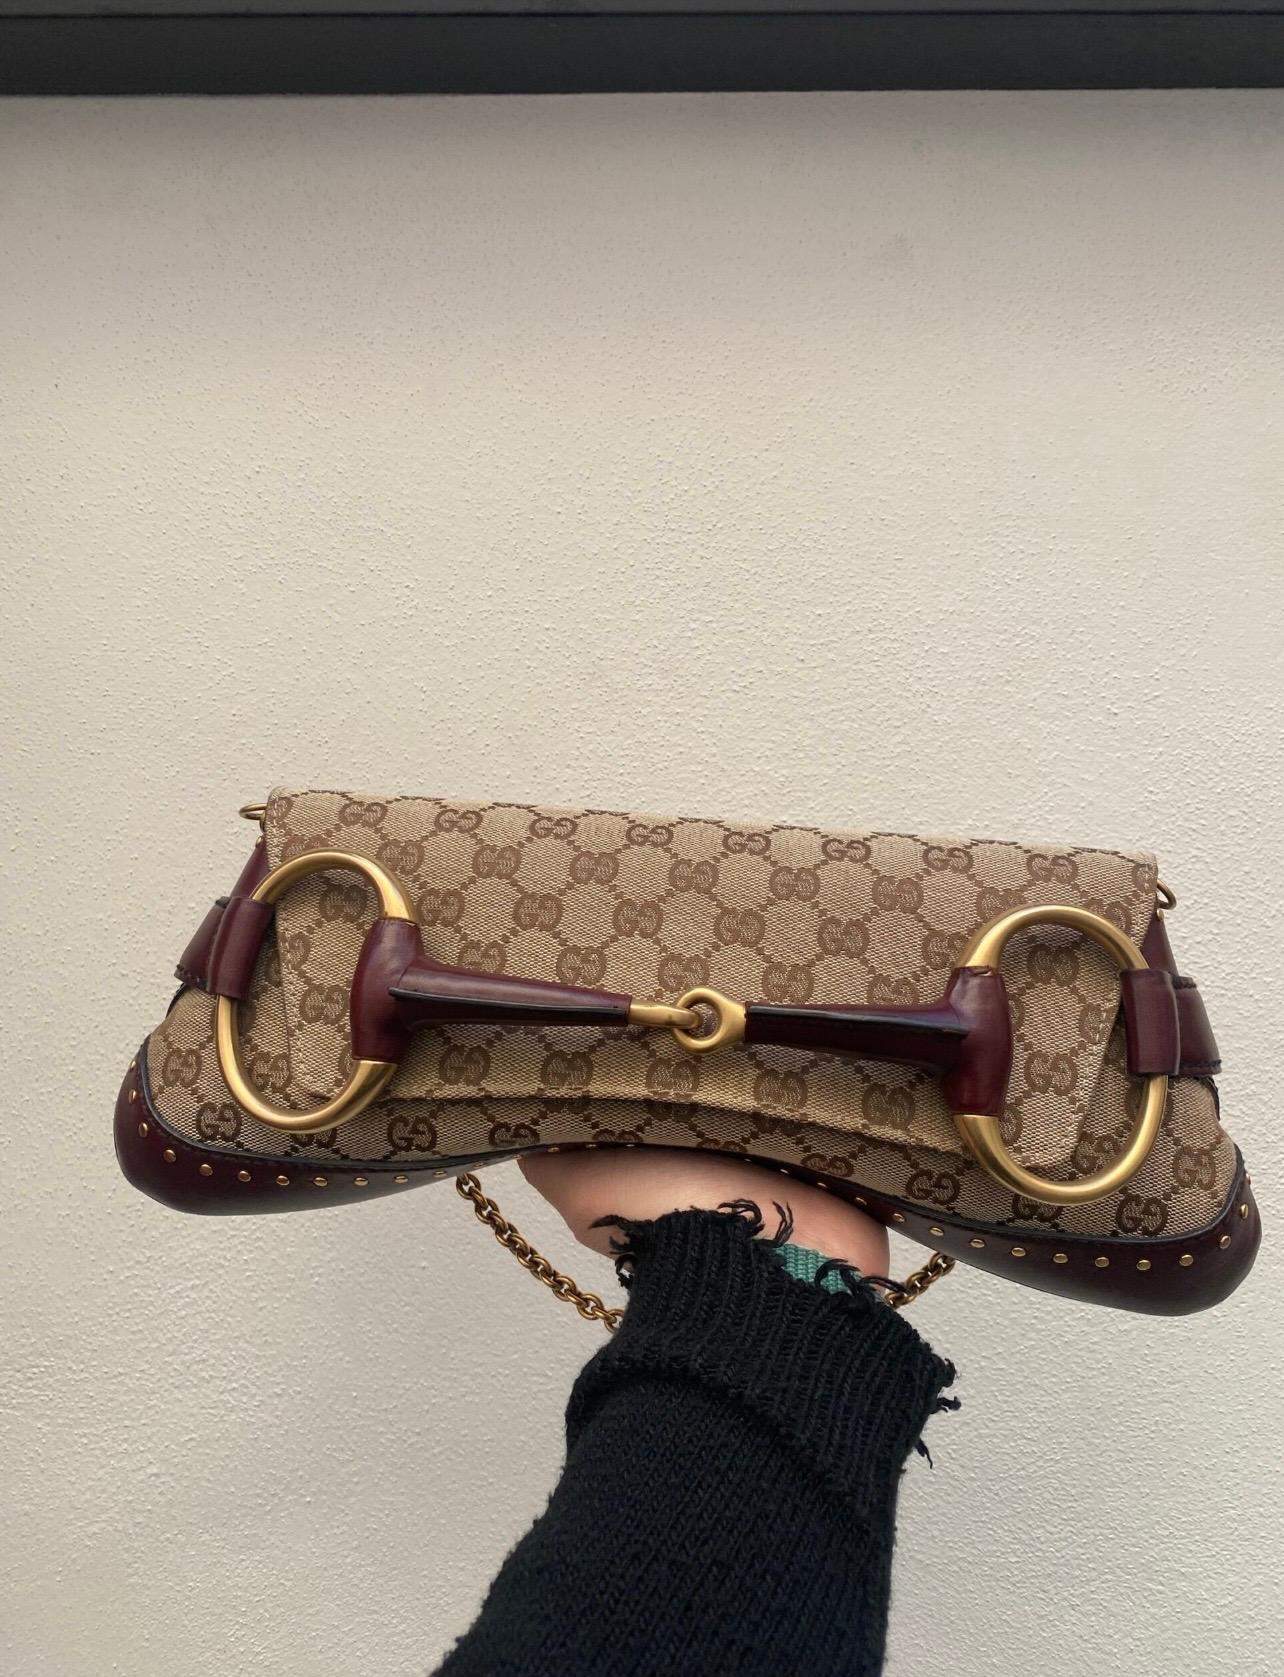 Gucci Tom Ford edition bag in GG Supreme canvas and burgundy leather with gold hardware.  Features a front flap with button closure. The interior is lined with a soft dark brown fabric.  The bag is equipped with a removable golden chain shoulder